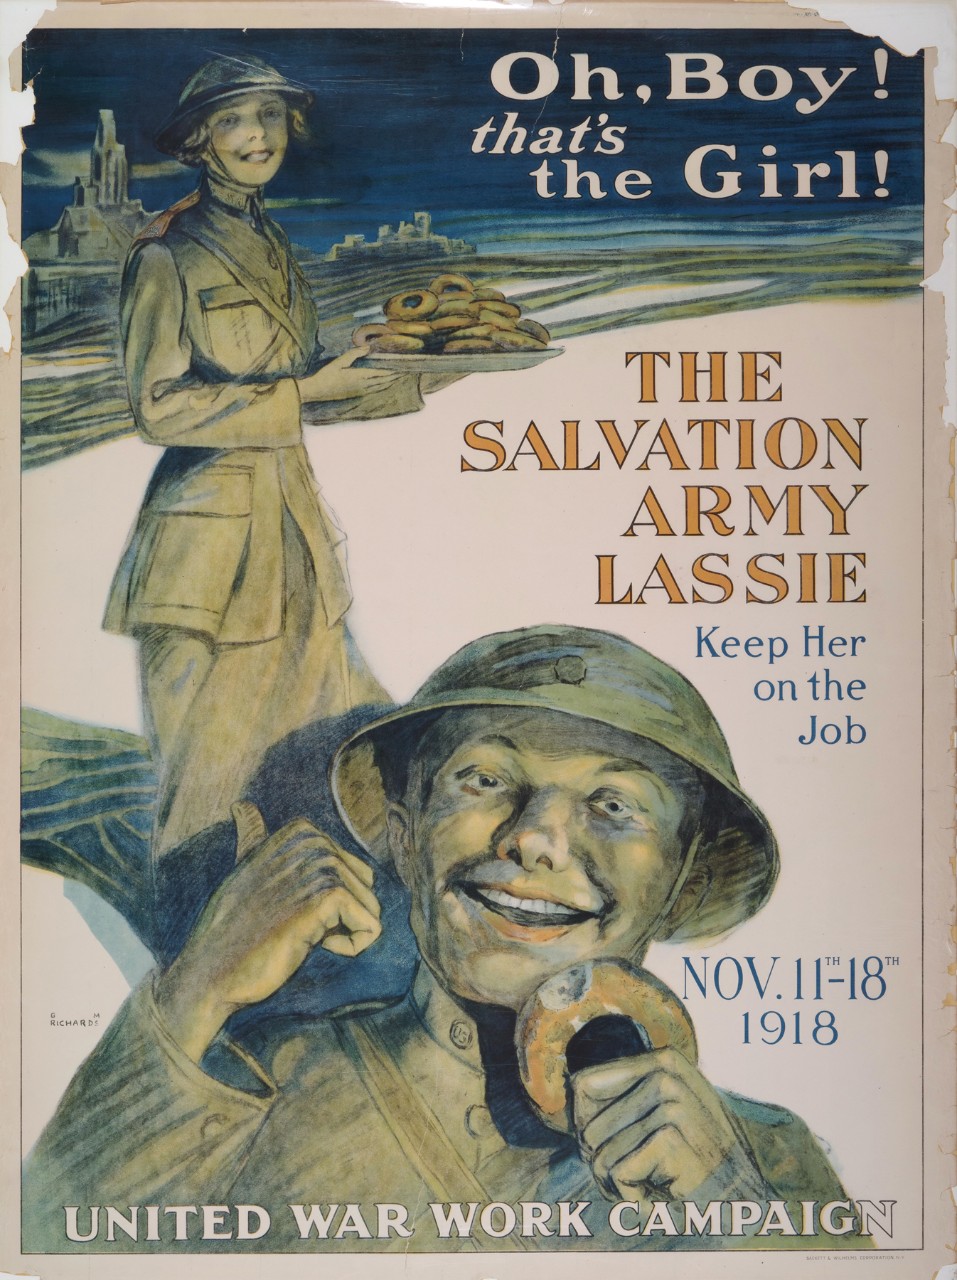 A soldier is eating a doughnut while a woman in uniform holding a plate of doughnuts stands behind him  